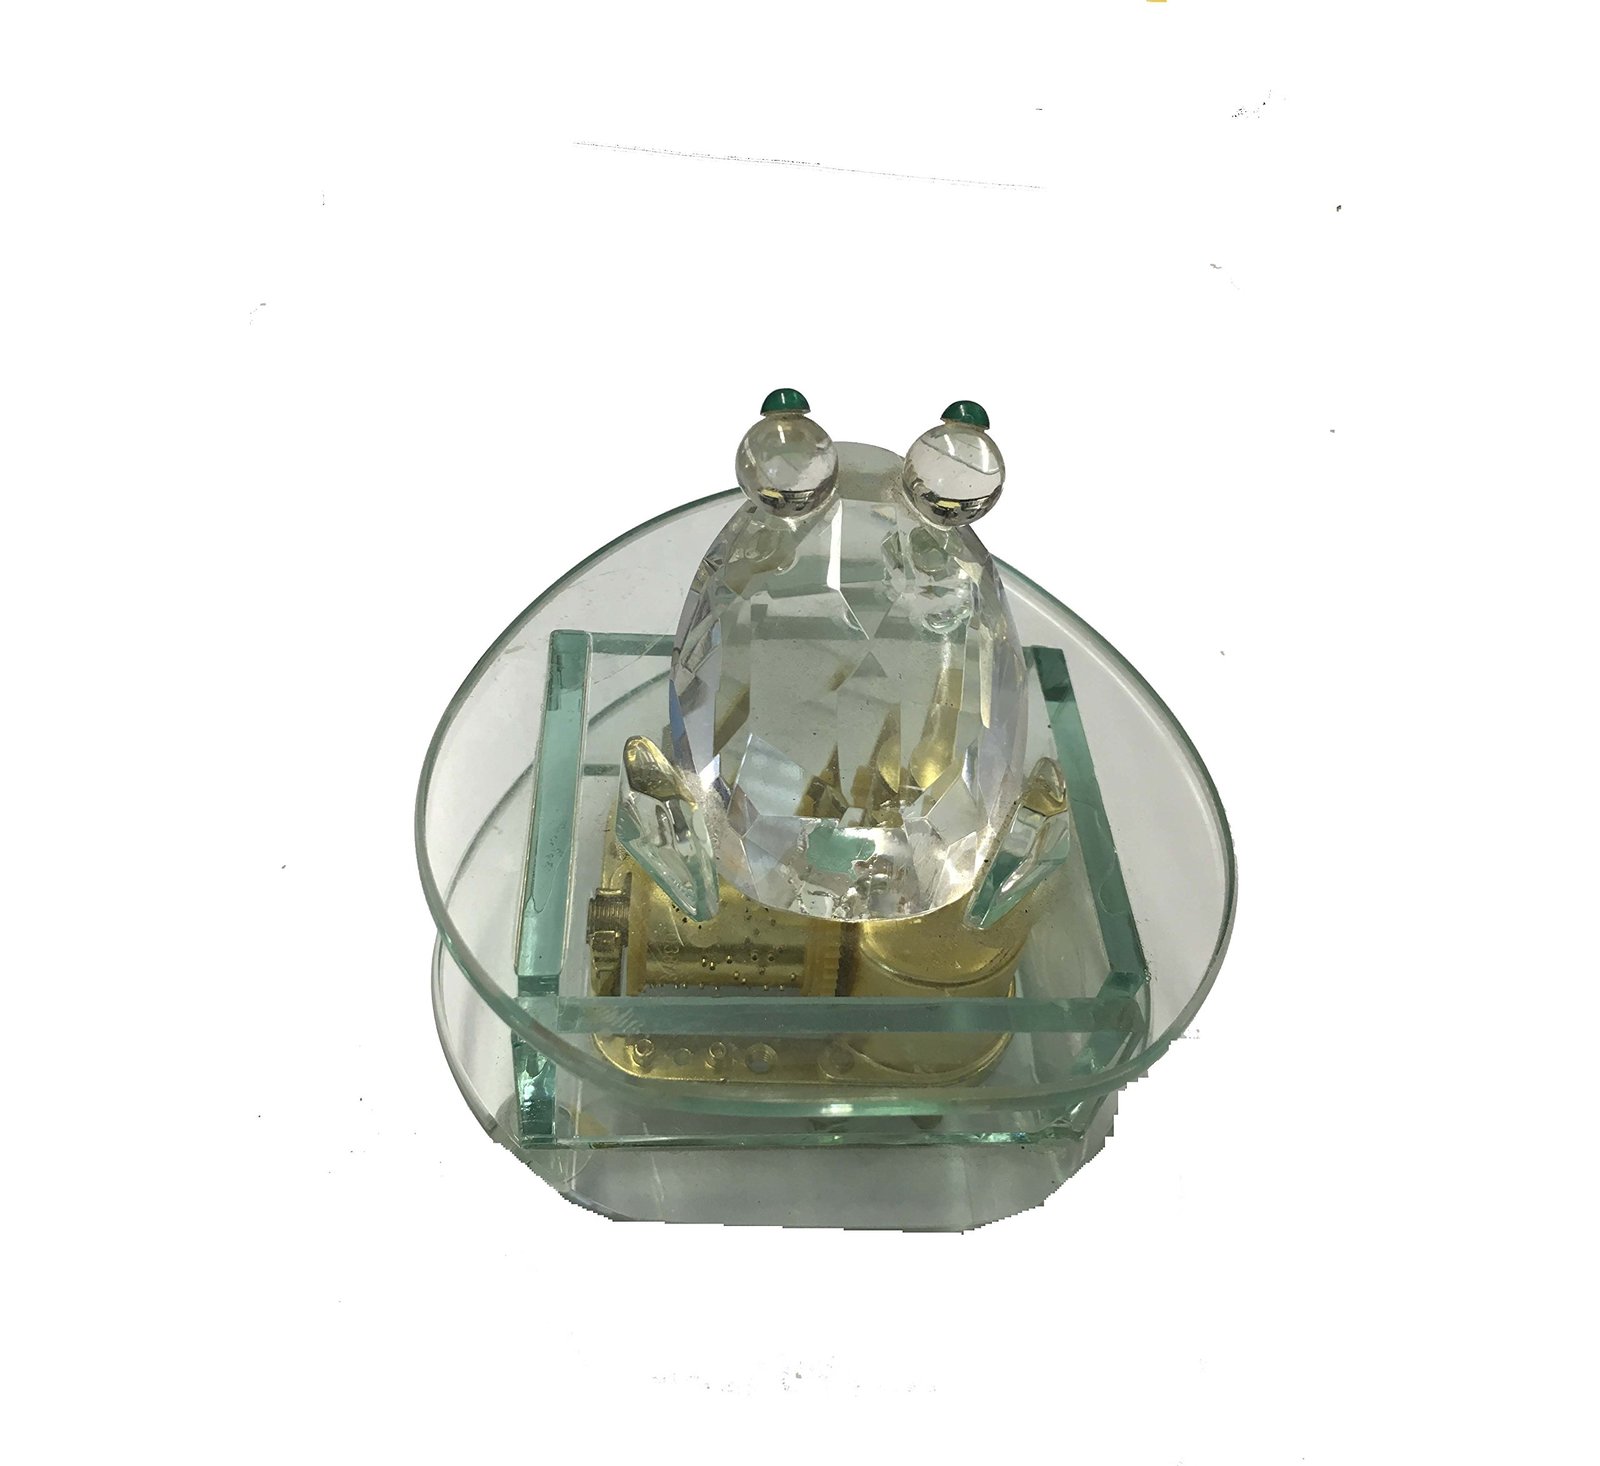 GLASS MUSICAL DECORATIVE ORNAMENT WITH A FROG ON TOP - $16.75